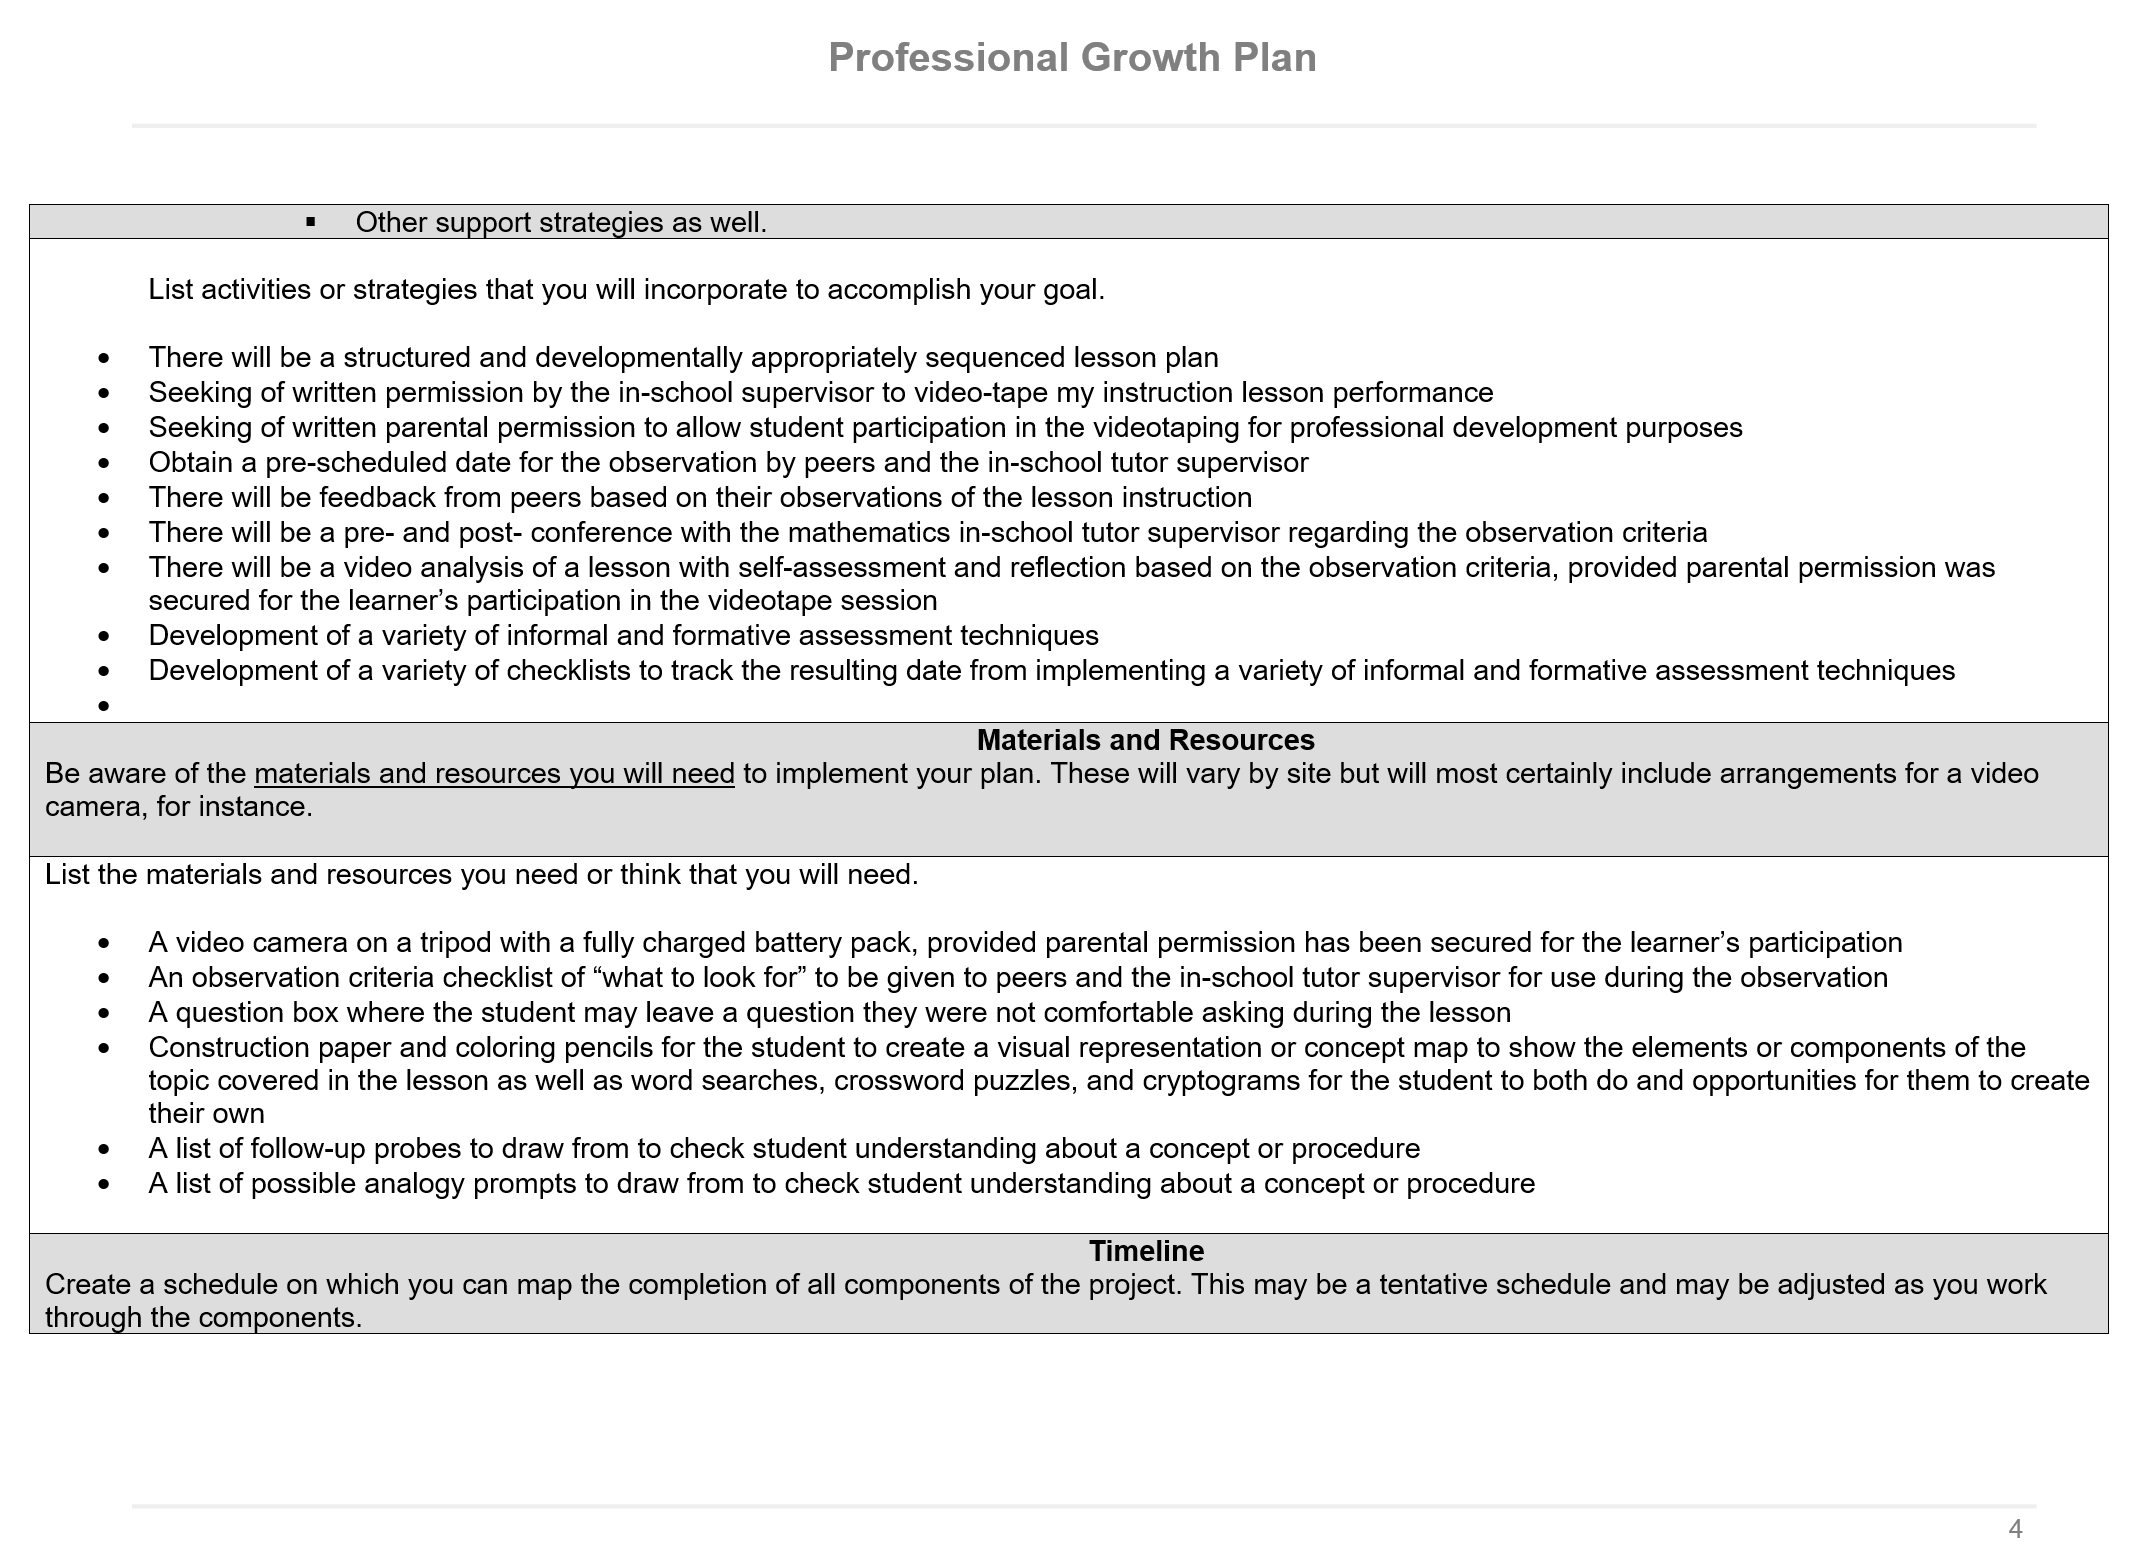 professional growth plan p 4 of 7